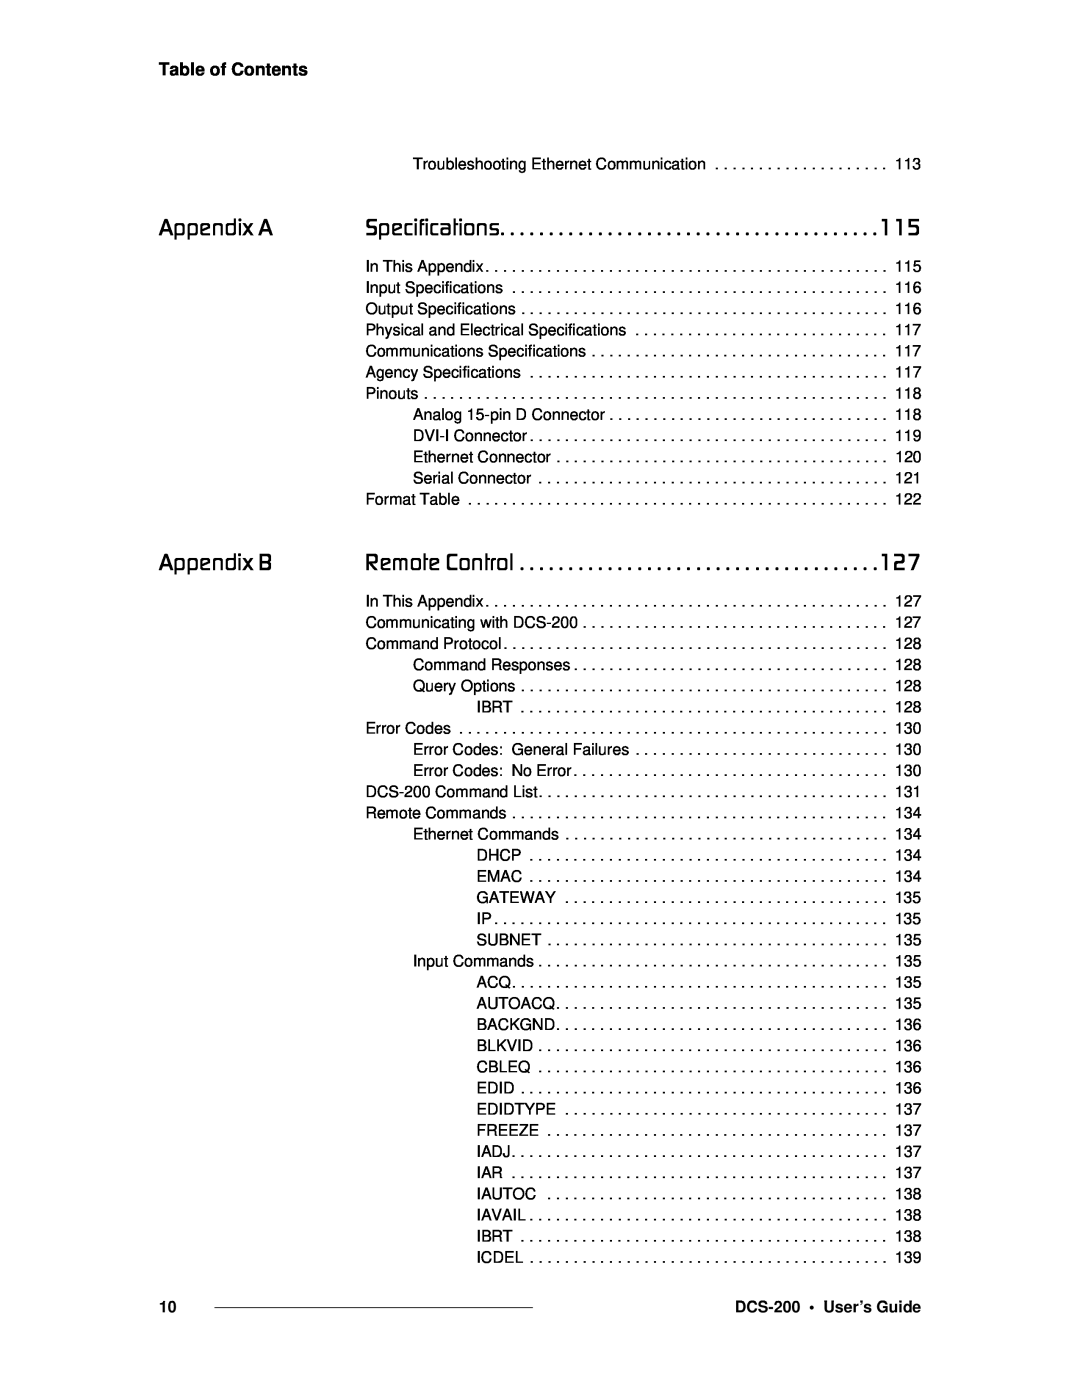 Barco manual Table of Contents, Troubleshooting Ethernet Communication, DCS-200 User’s Guide 